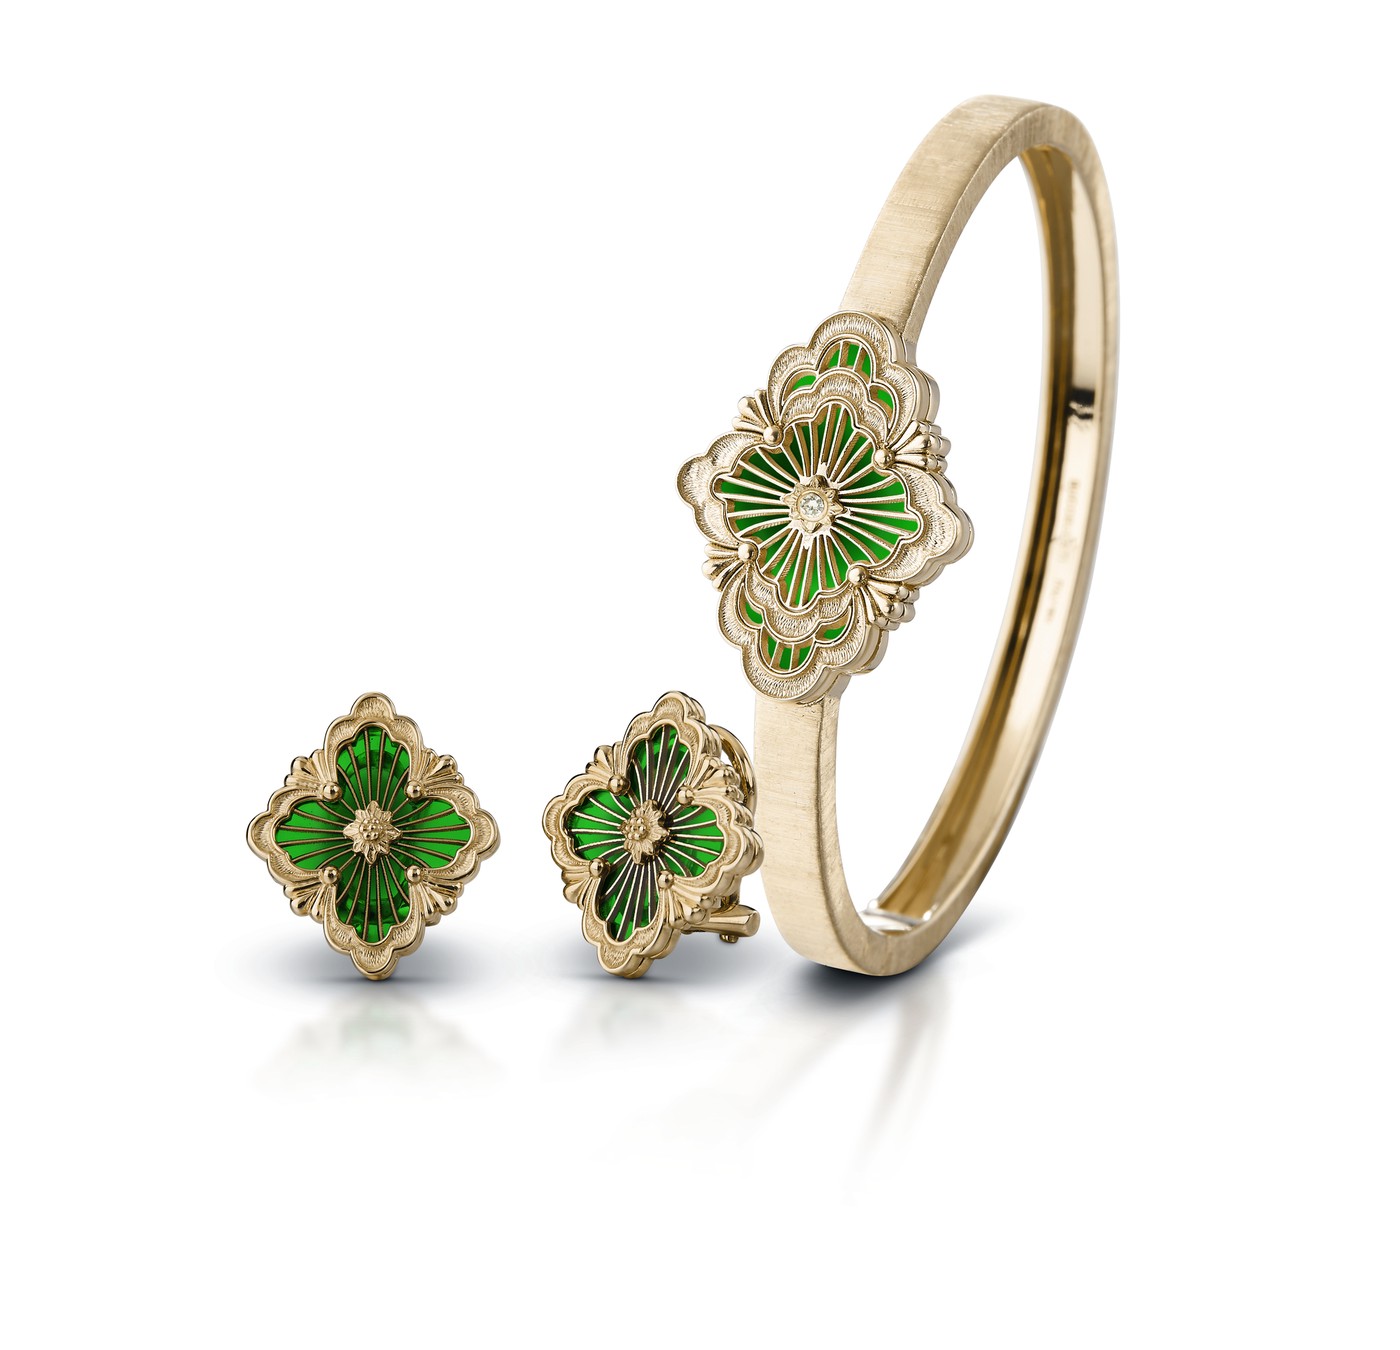 Opera Tulle bangle bracelet and earrings in yellow gold with green enamel background